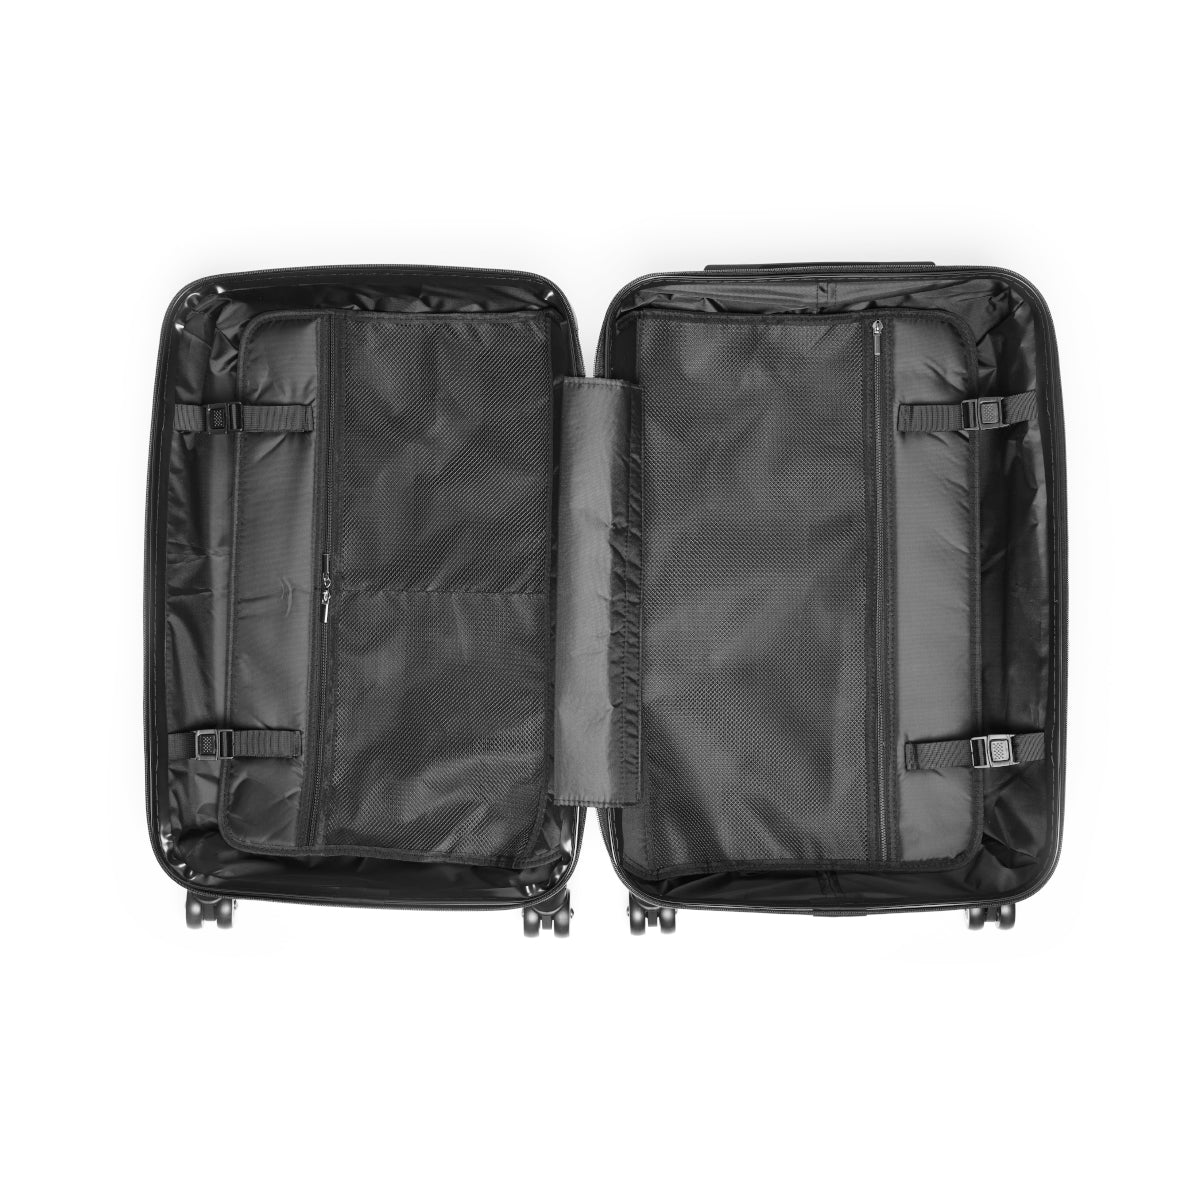 Getrott Blink182 Enema of the State 1999 Black Cabin Suitcase Inner Pockets Extended Storage Adjustable Telescopic Handle Inner Pockets Double wheeled Polycarbonate Hard-shell Built-in Lock